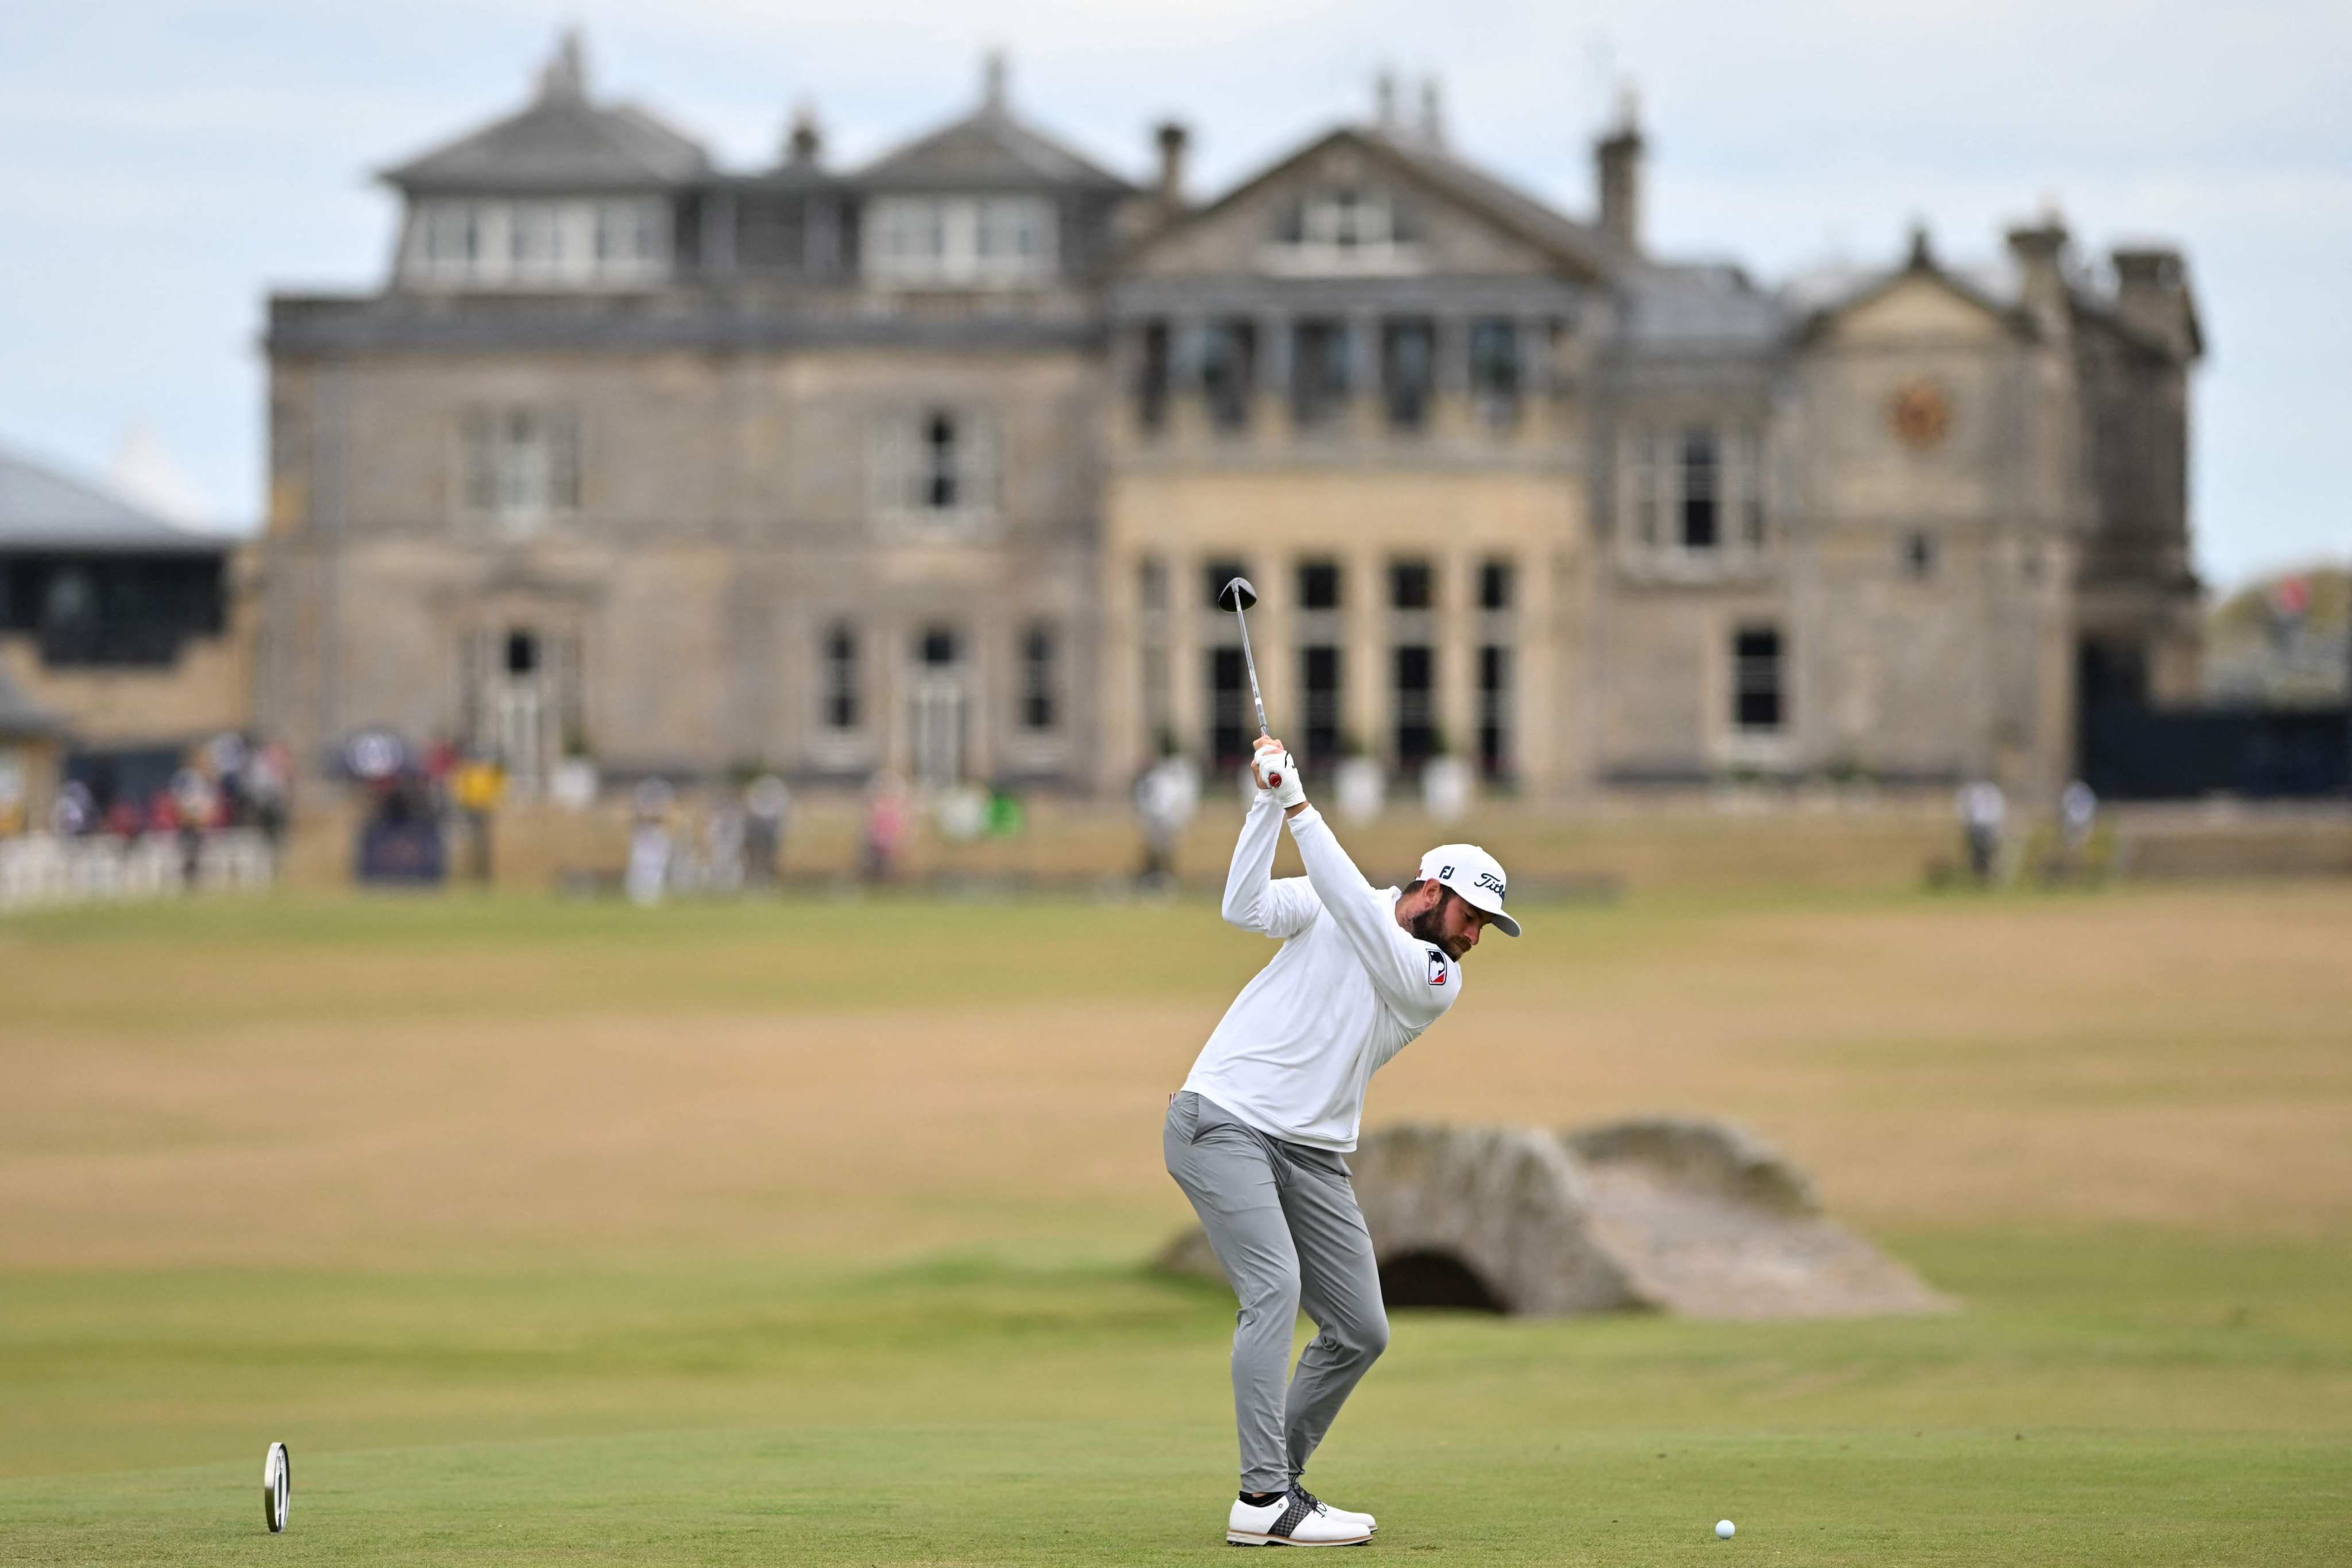 Cameron Young plays from the 18th tee during his opening round 64 on the first day of The 150th Open Championship at St Andrews. Photo: AFP